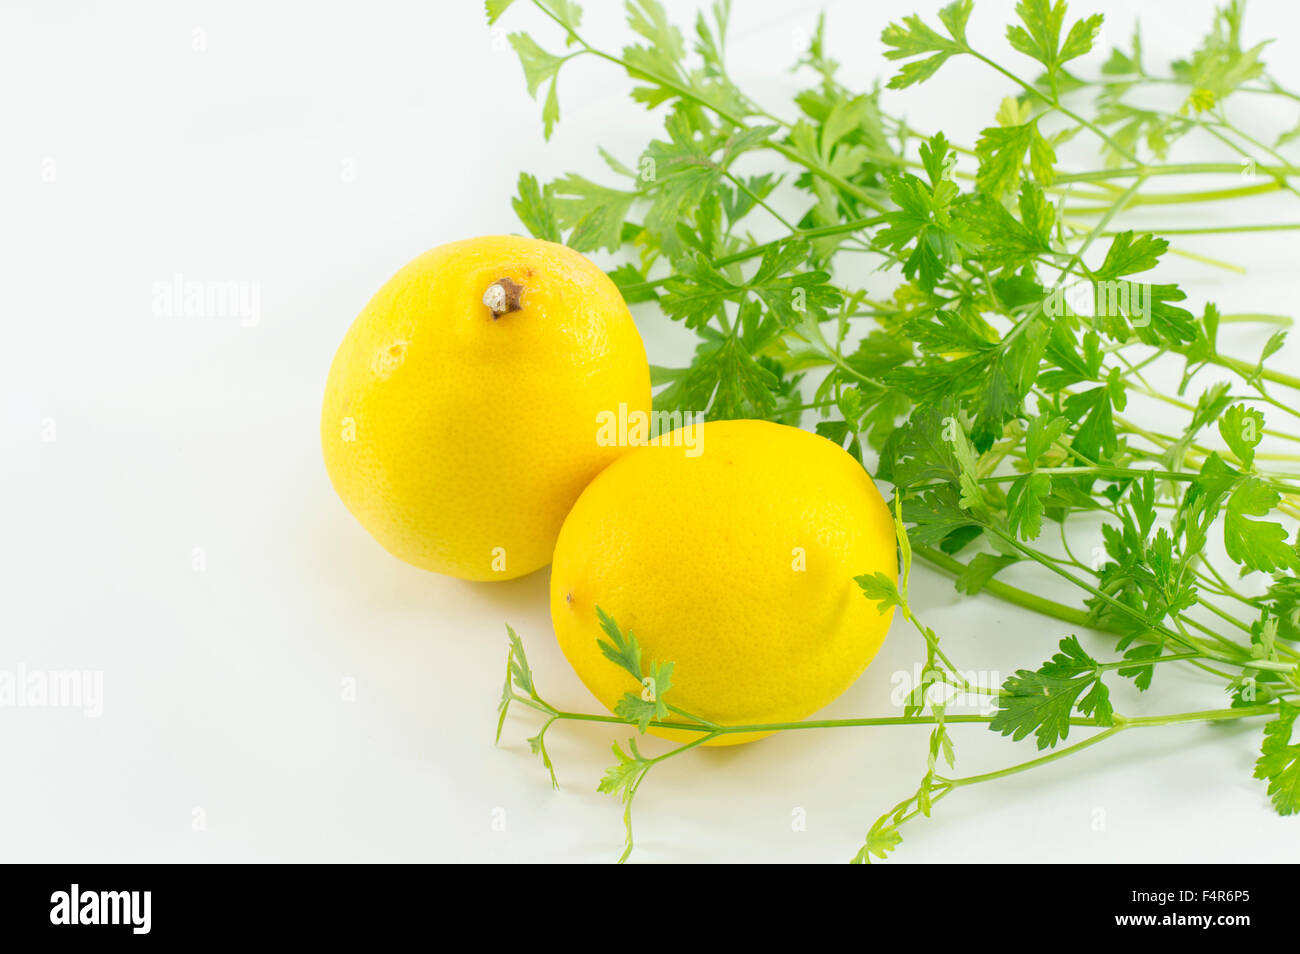 Lemons and parsley. Healthy lifestyle abstract Stock Photo